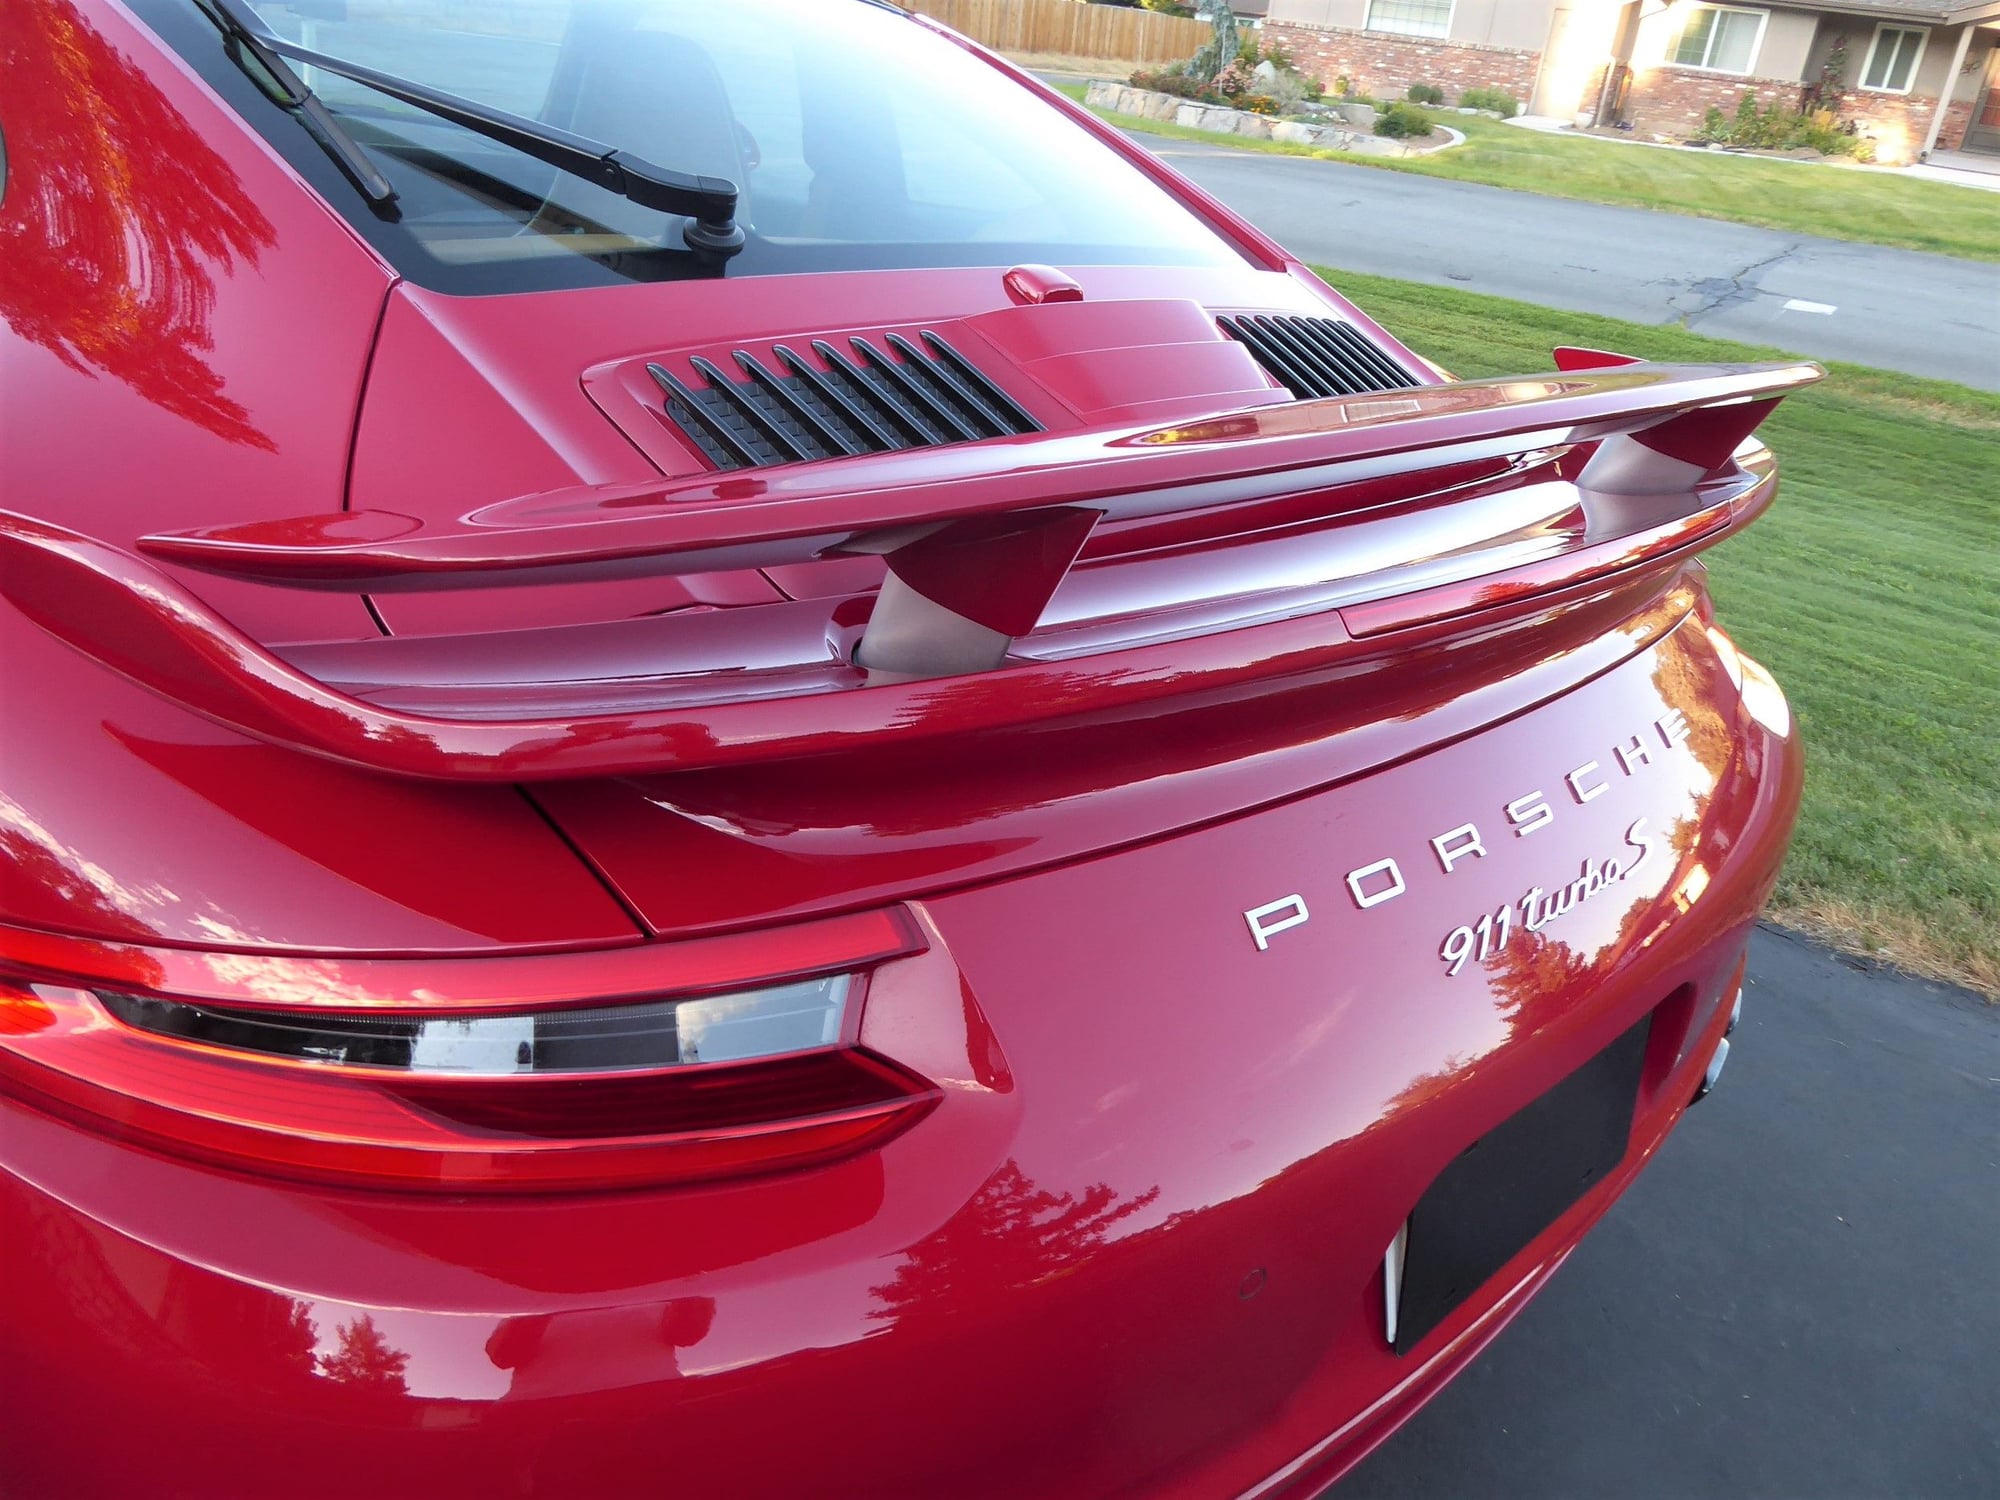 2017 Porsche 911 - Carmine Red 911 Turbo S - Used - VIN wp0ad2a96hs166623 - 9,950 Miles - 6 cyl - 4WD - Automatic - Coupe - Red - Reno, NV 89511, United States